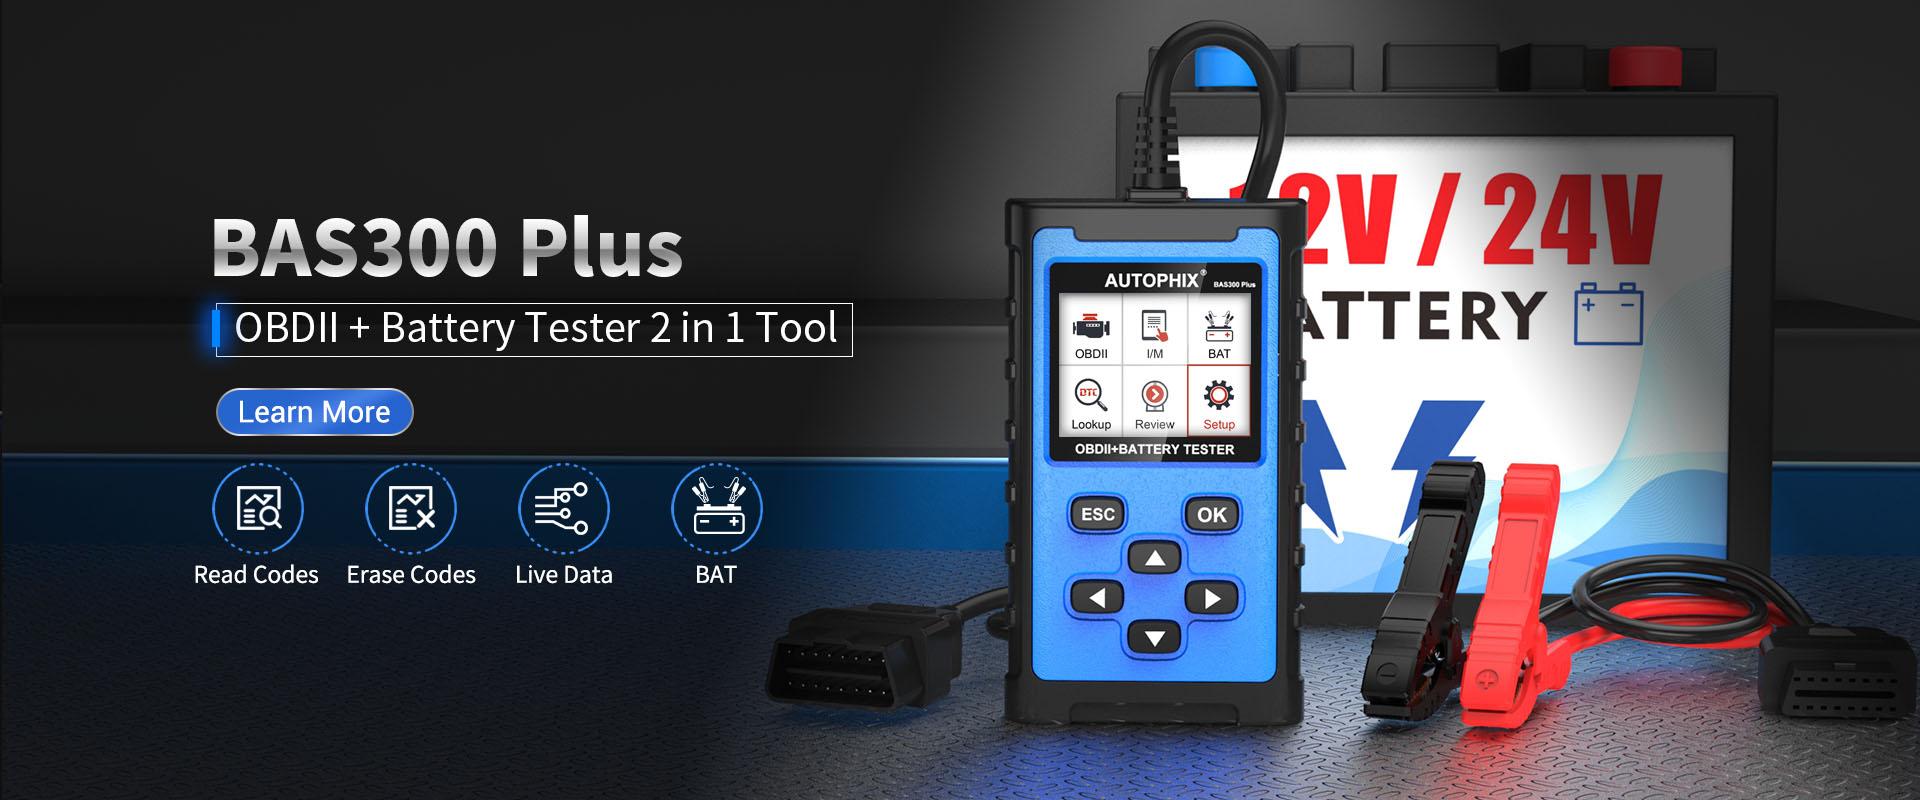 AUTOPHIX BAS300 PLUS-OBDIl + Battery Tester 2 in 1 Tool